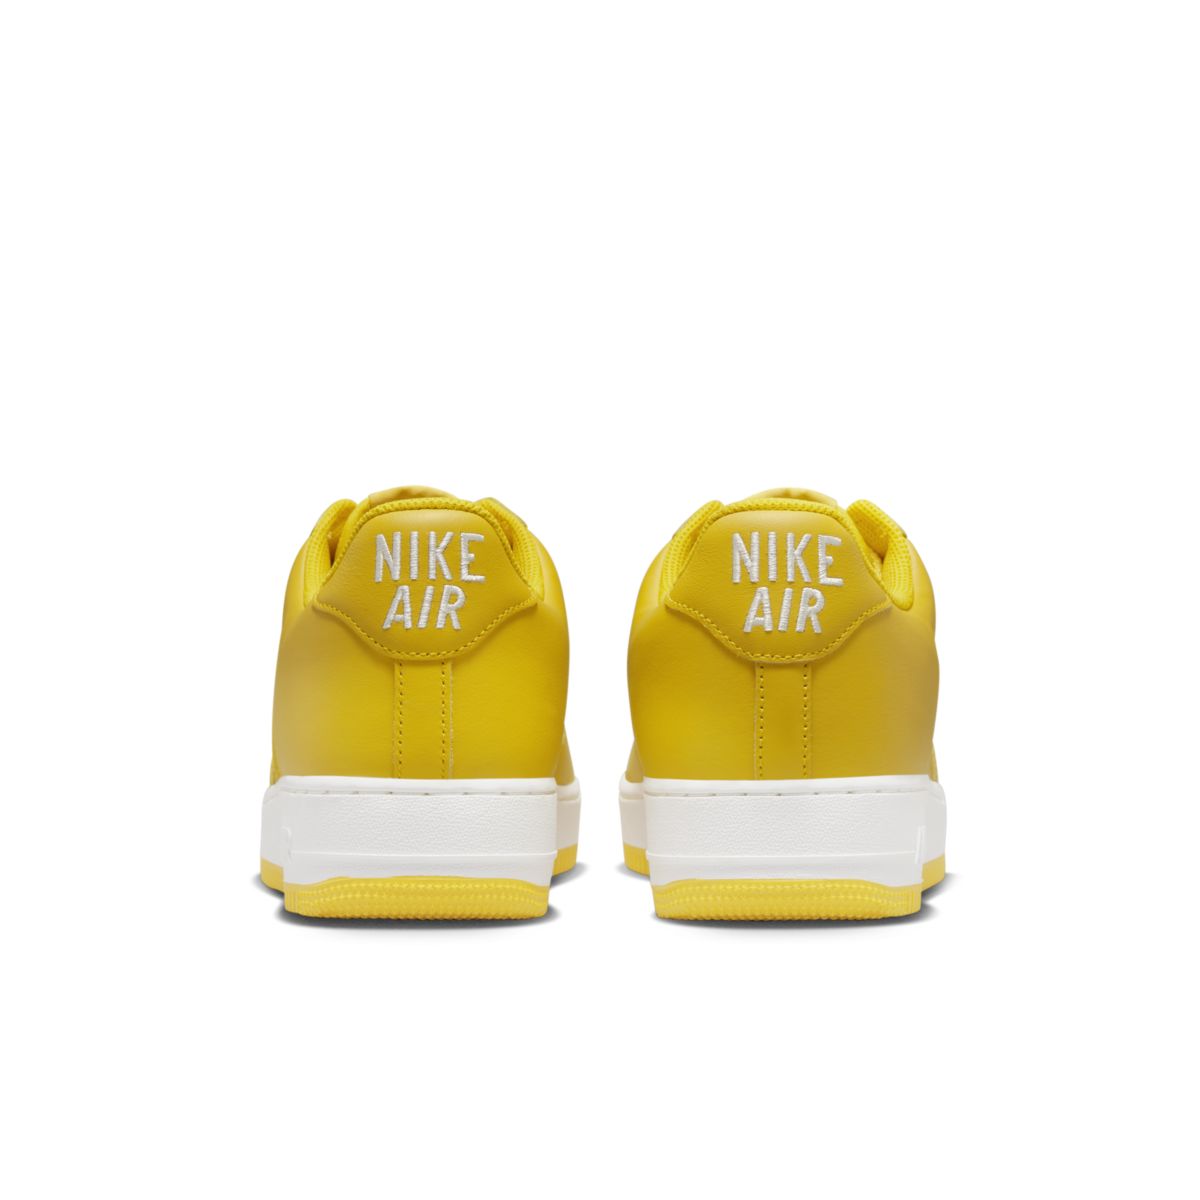 Nike Air Force 1 Low Yellow Jewel Color of the Month FJ1044-700 6